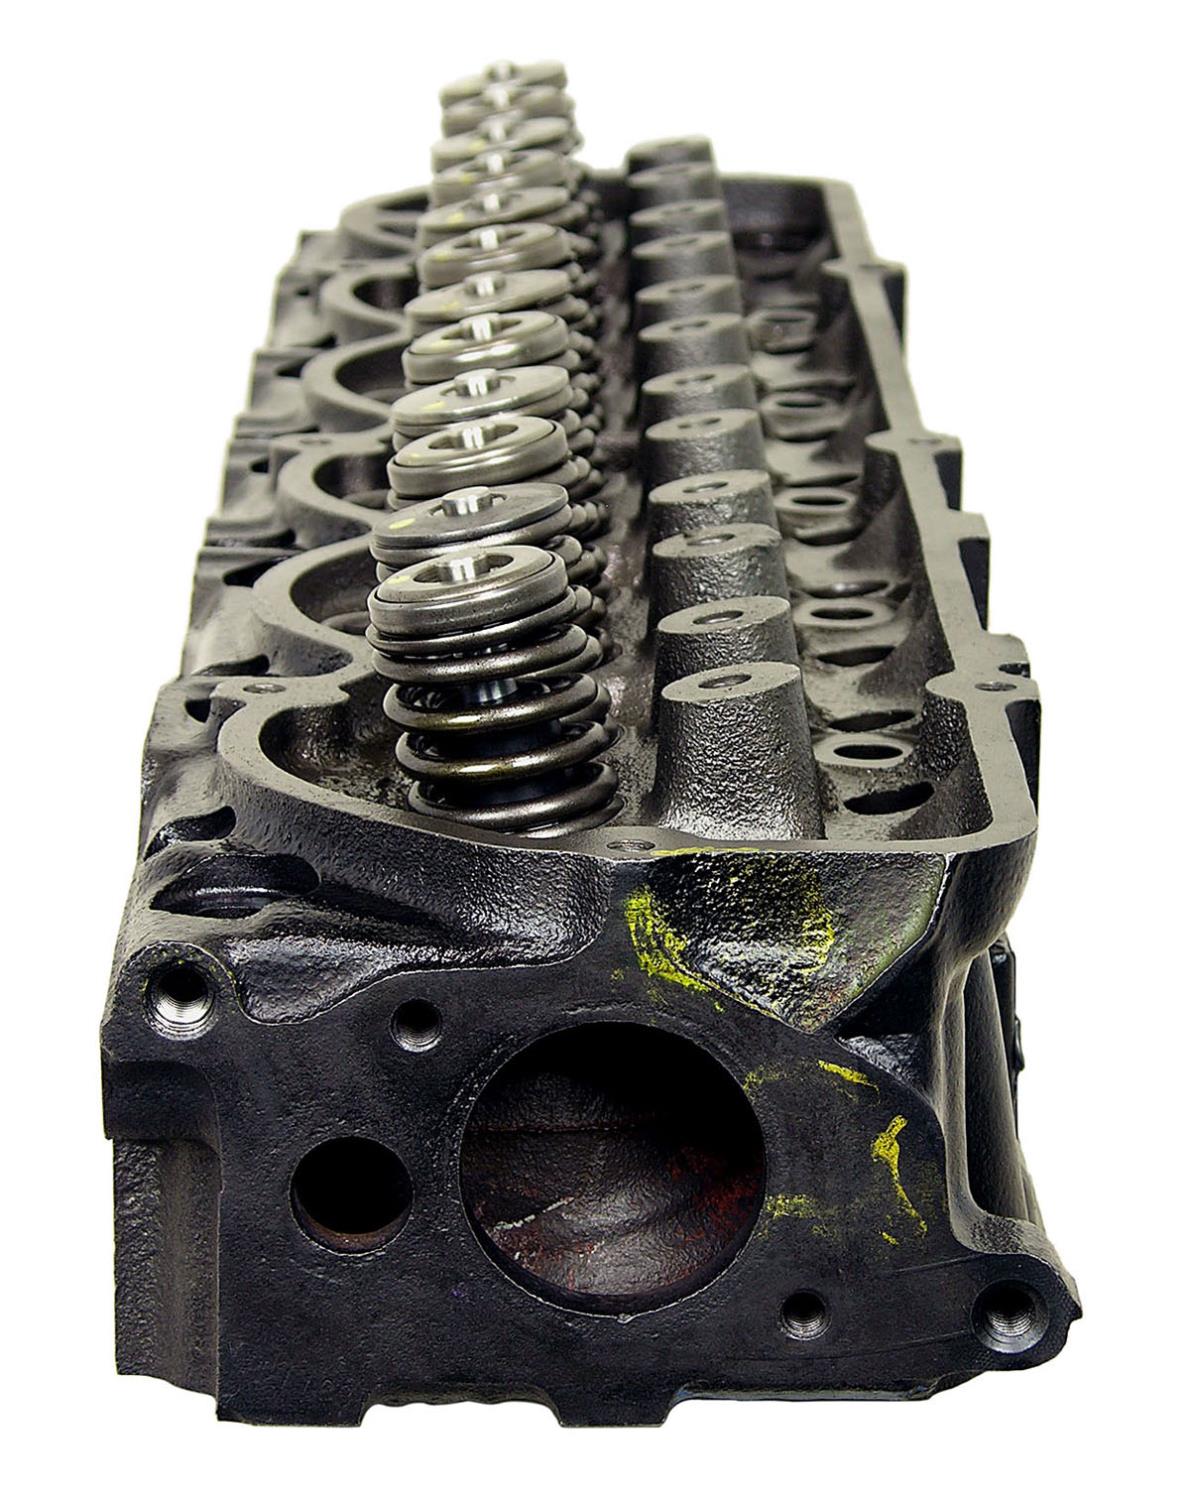 Remanufactured Cylinder Head for 1987-1996 Ford with 300ci/4.9L